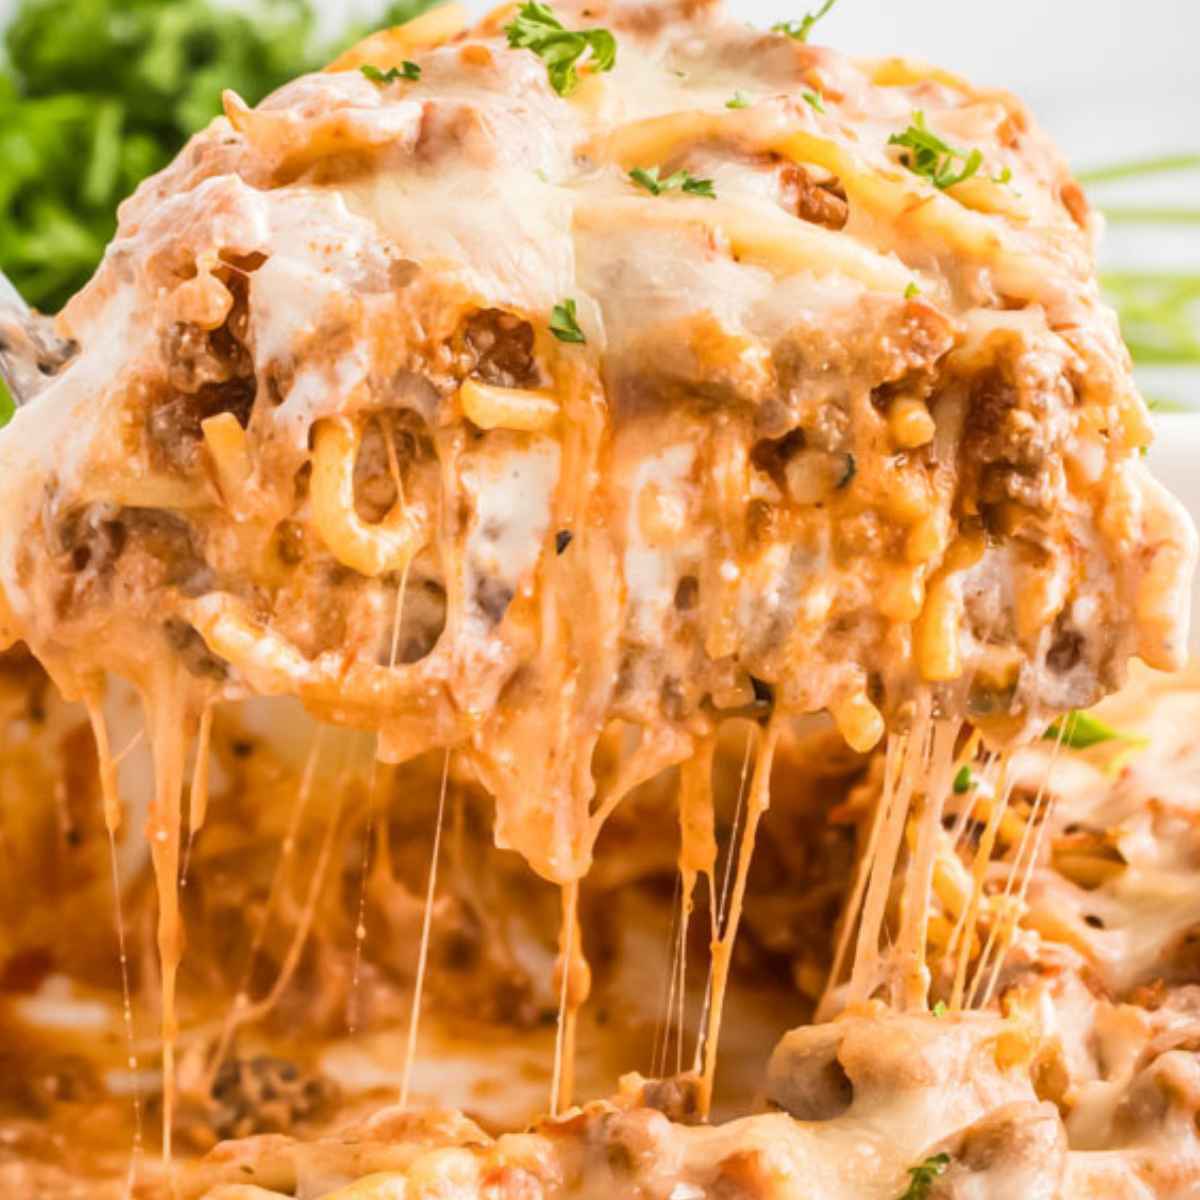 Hot Cheesy baked spaghetti being pulled from the pan